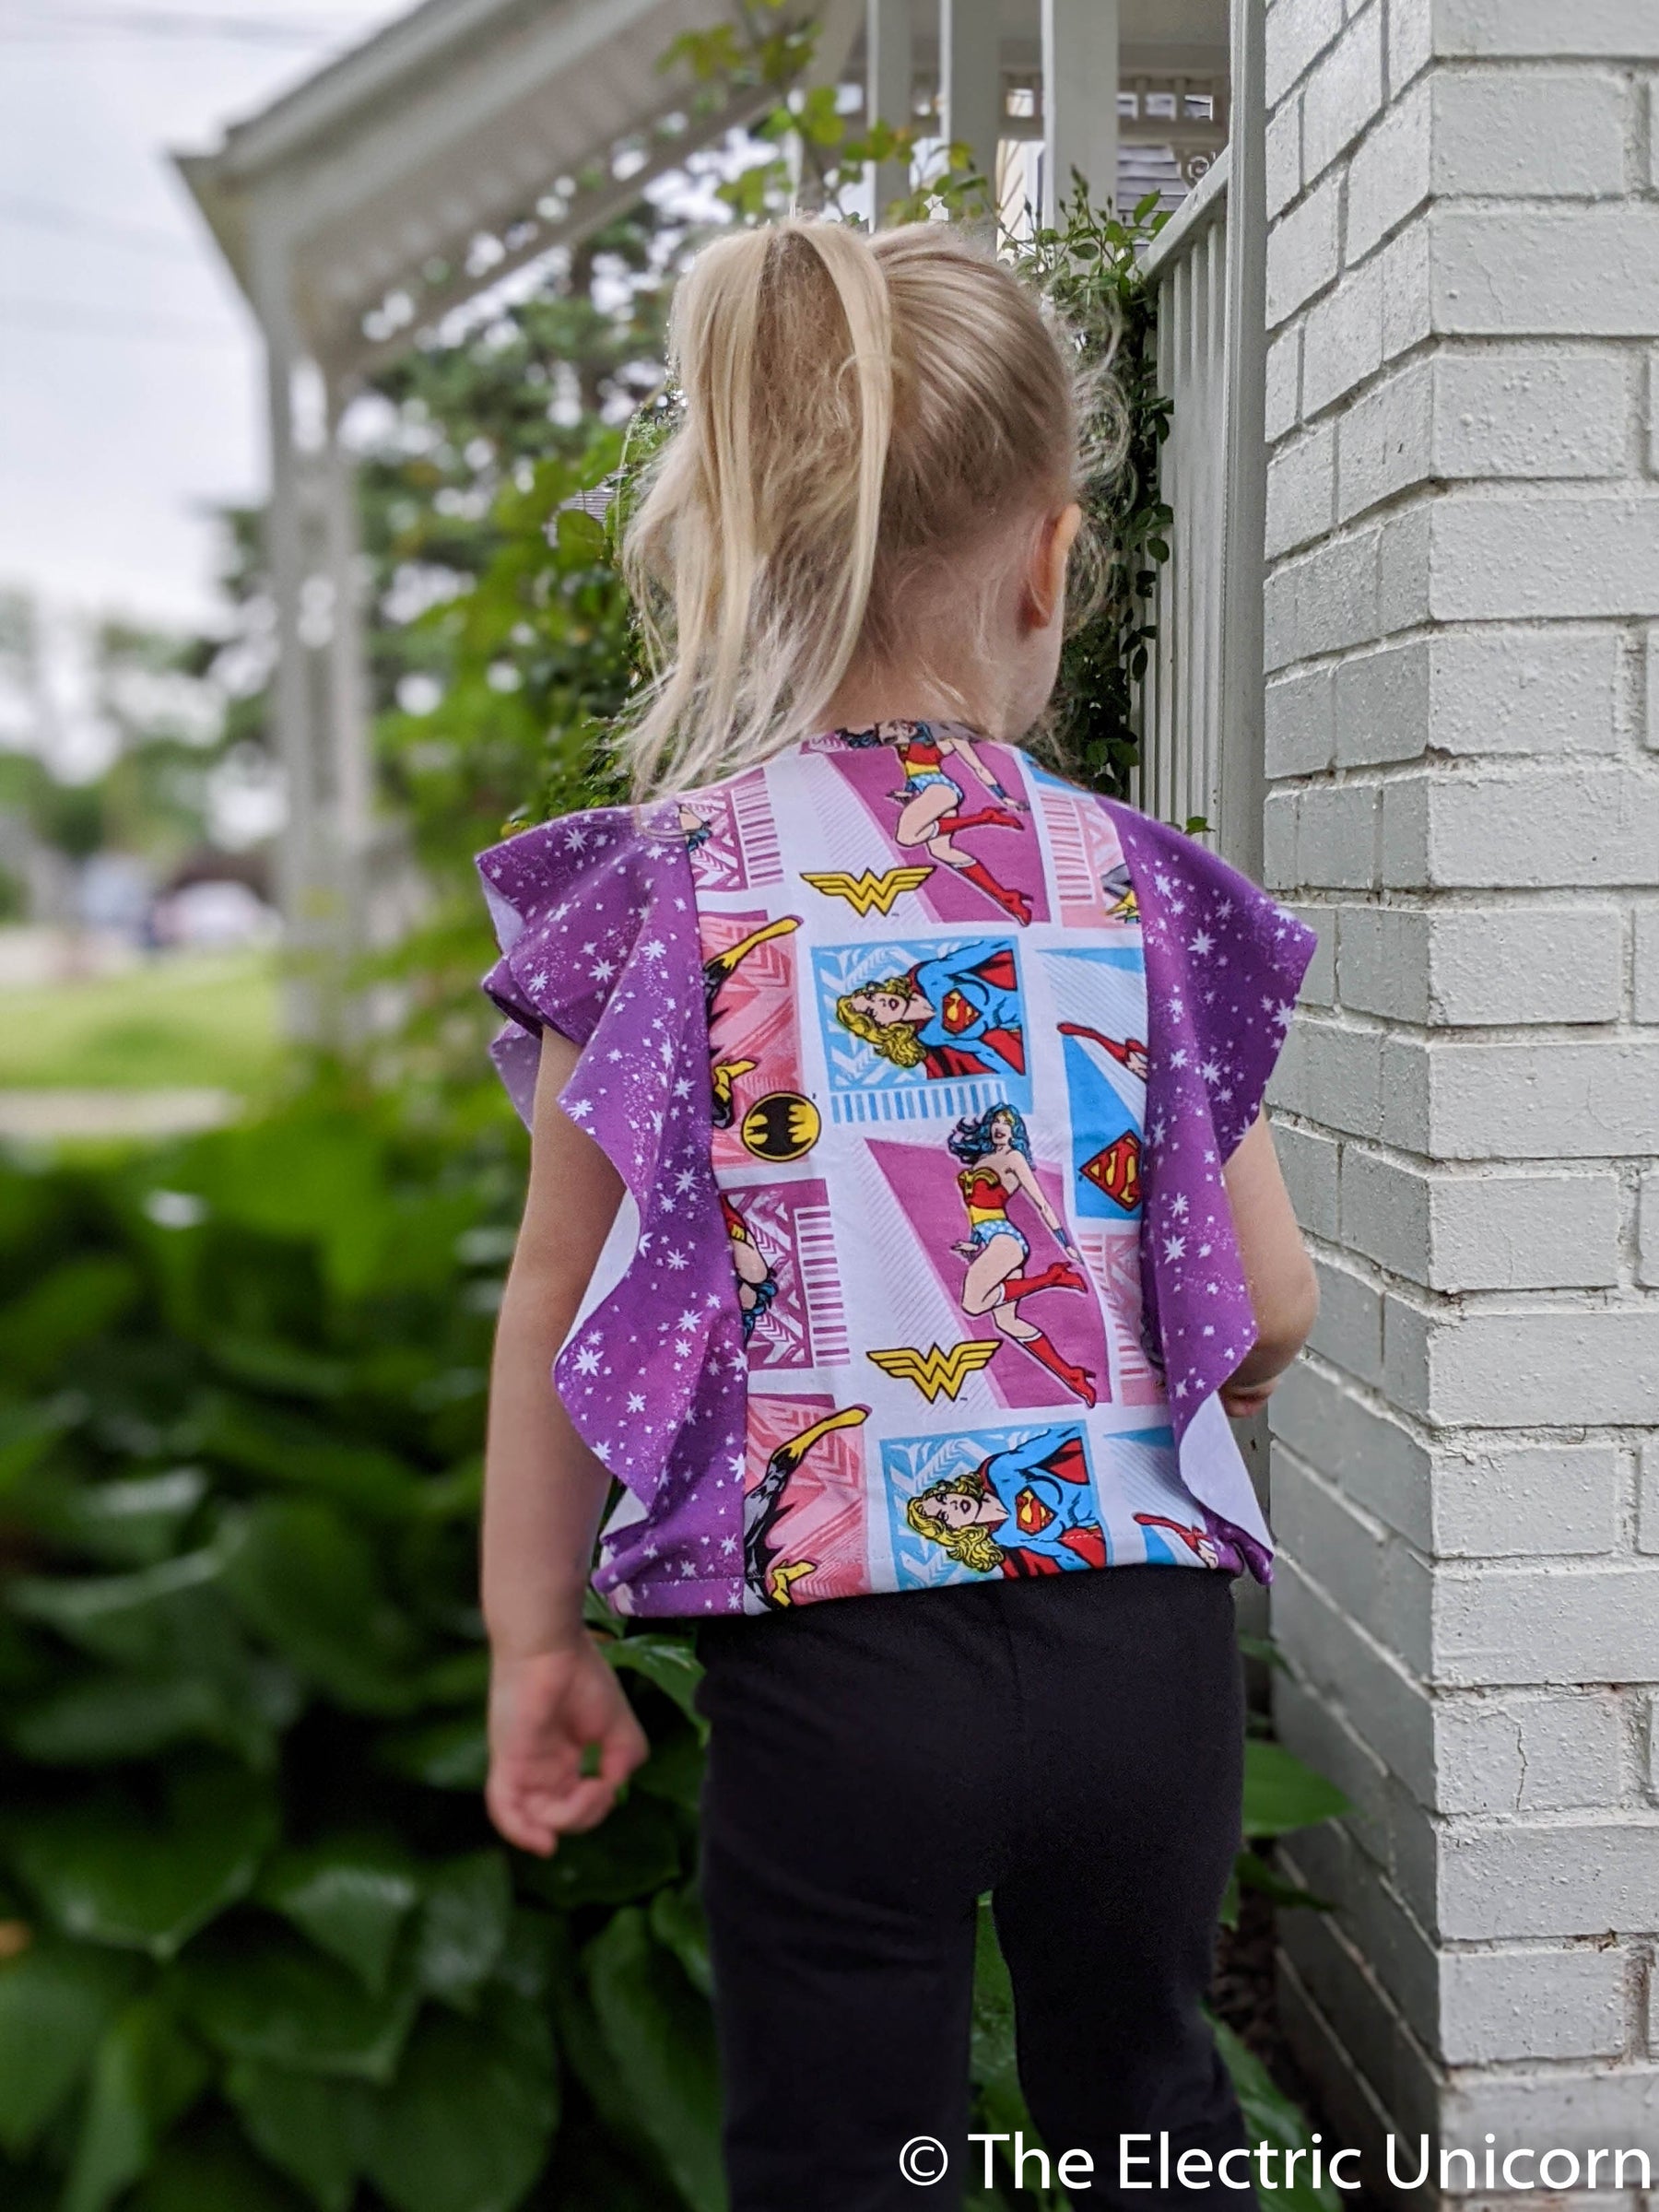 Kids Forever Flounce Top Pattern